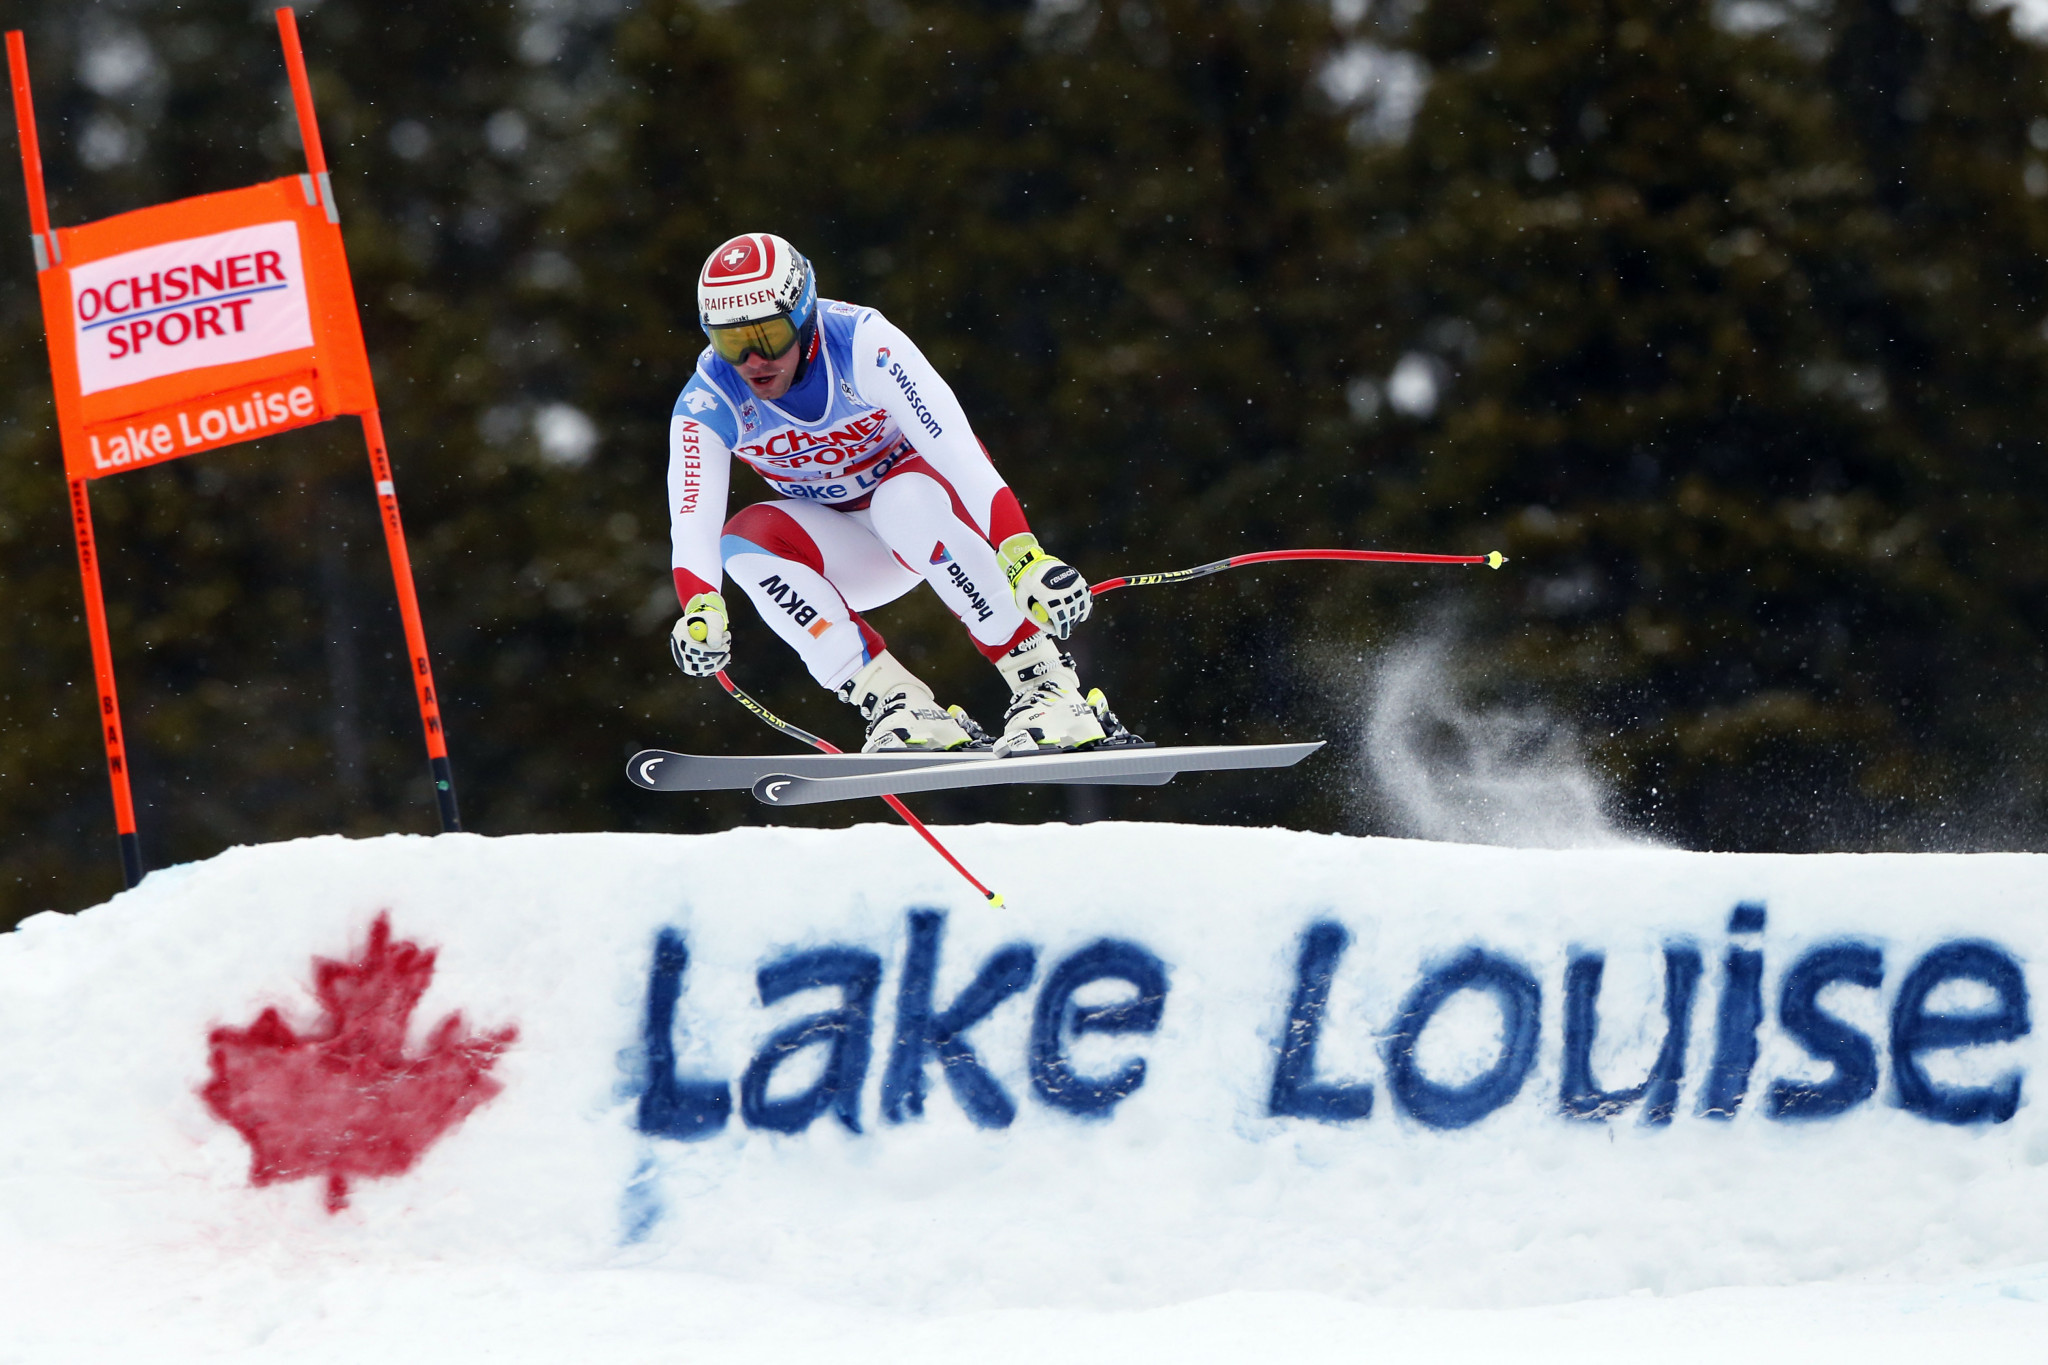 Lake Louise is set to host a leg of the FIS Ski World Cup ©Getty Images